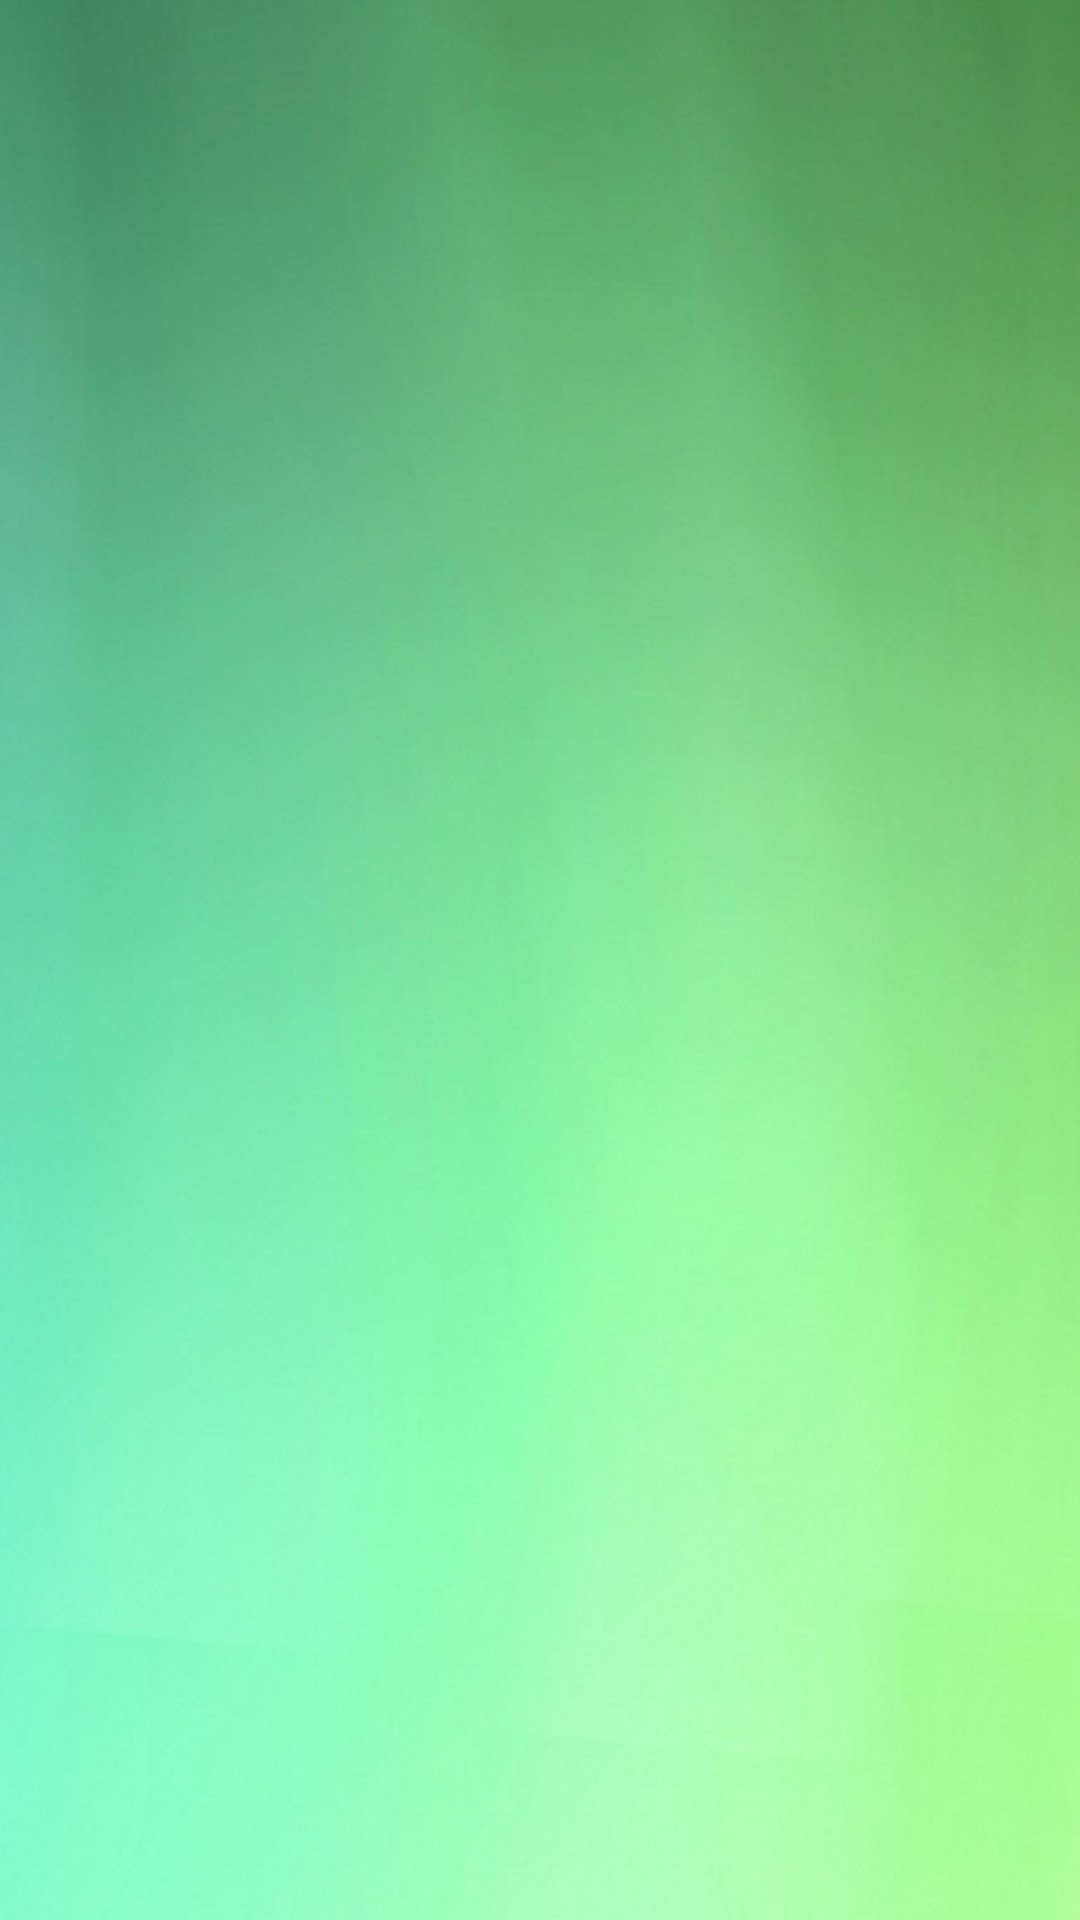 Light Green Wallpaper Android with image resolution 1080x1920 pixel. You can make this wallpaper for your Android backgrounds, Tablet, Smartphones Screensavers and Mobile Phone Lock Screen